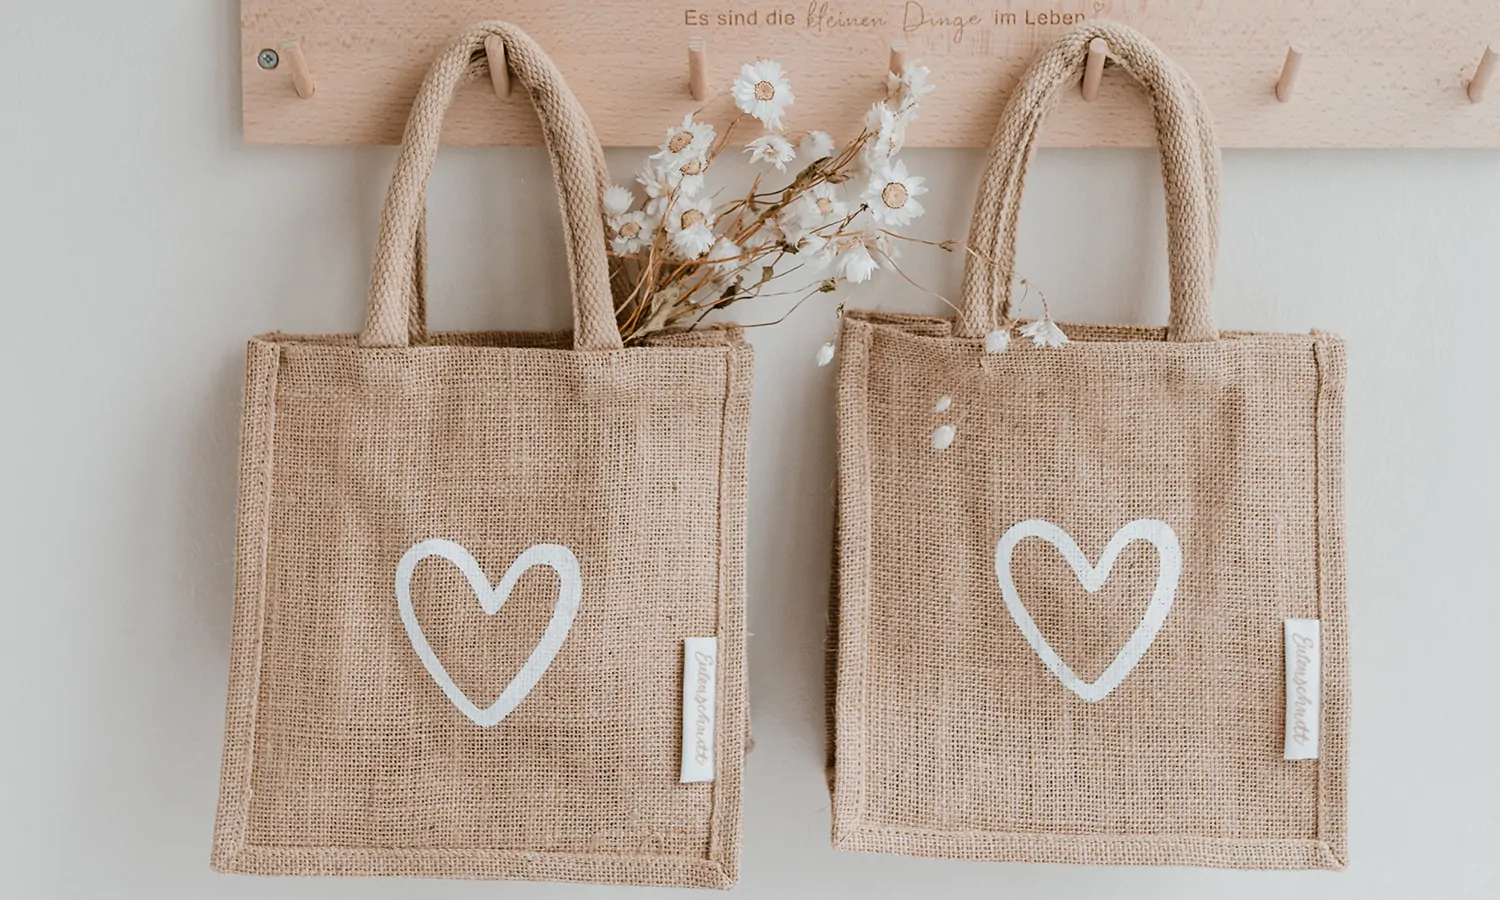 Category Shopping bags